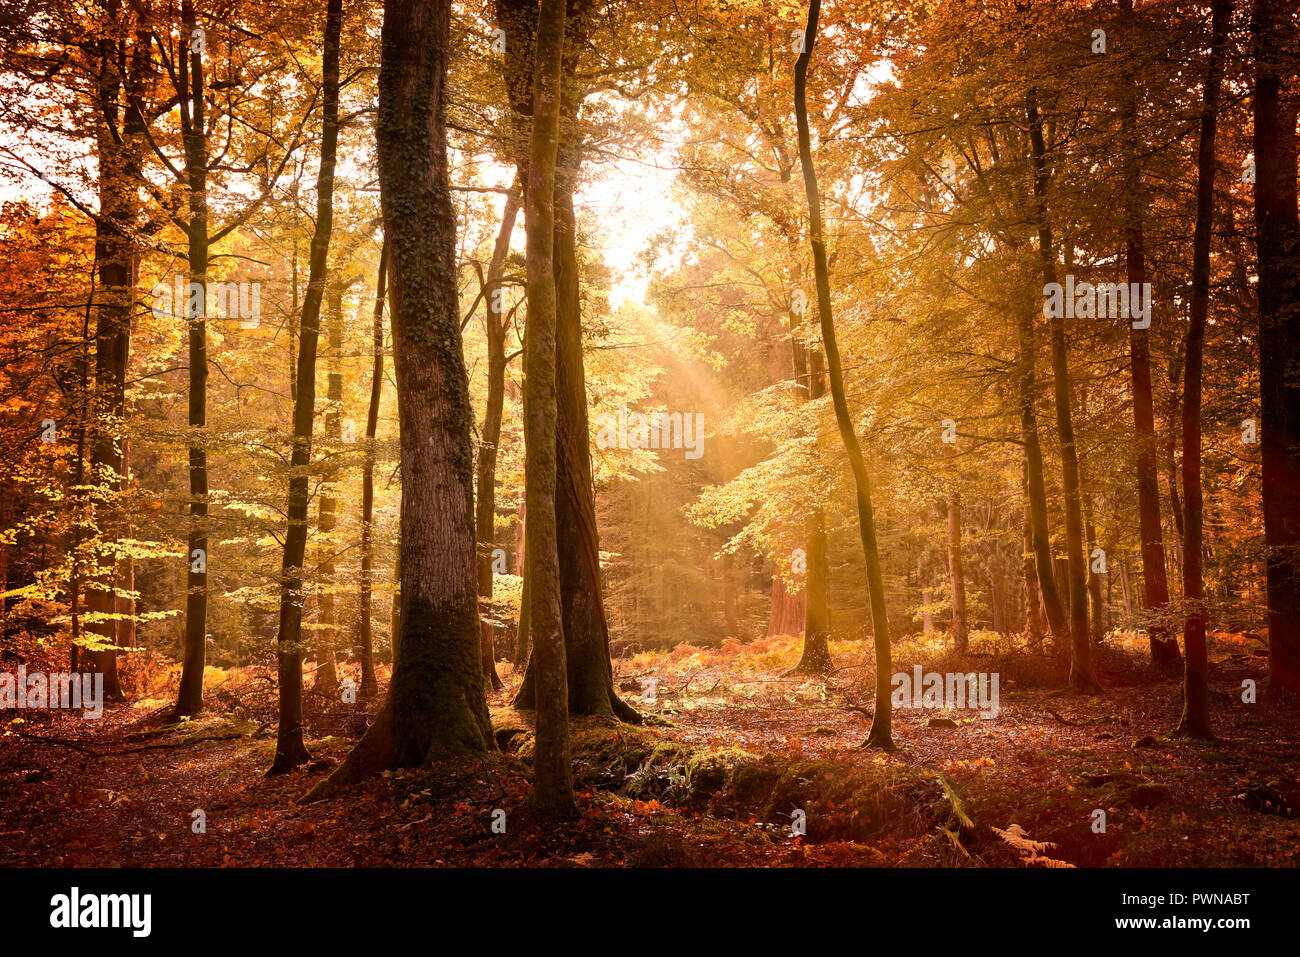 Autumn landscape in the New Forest with the ground covered in fallen leaves and sunlight filtering through the golden trees. Stock Photo